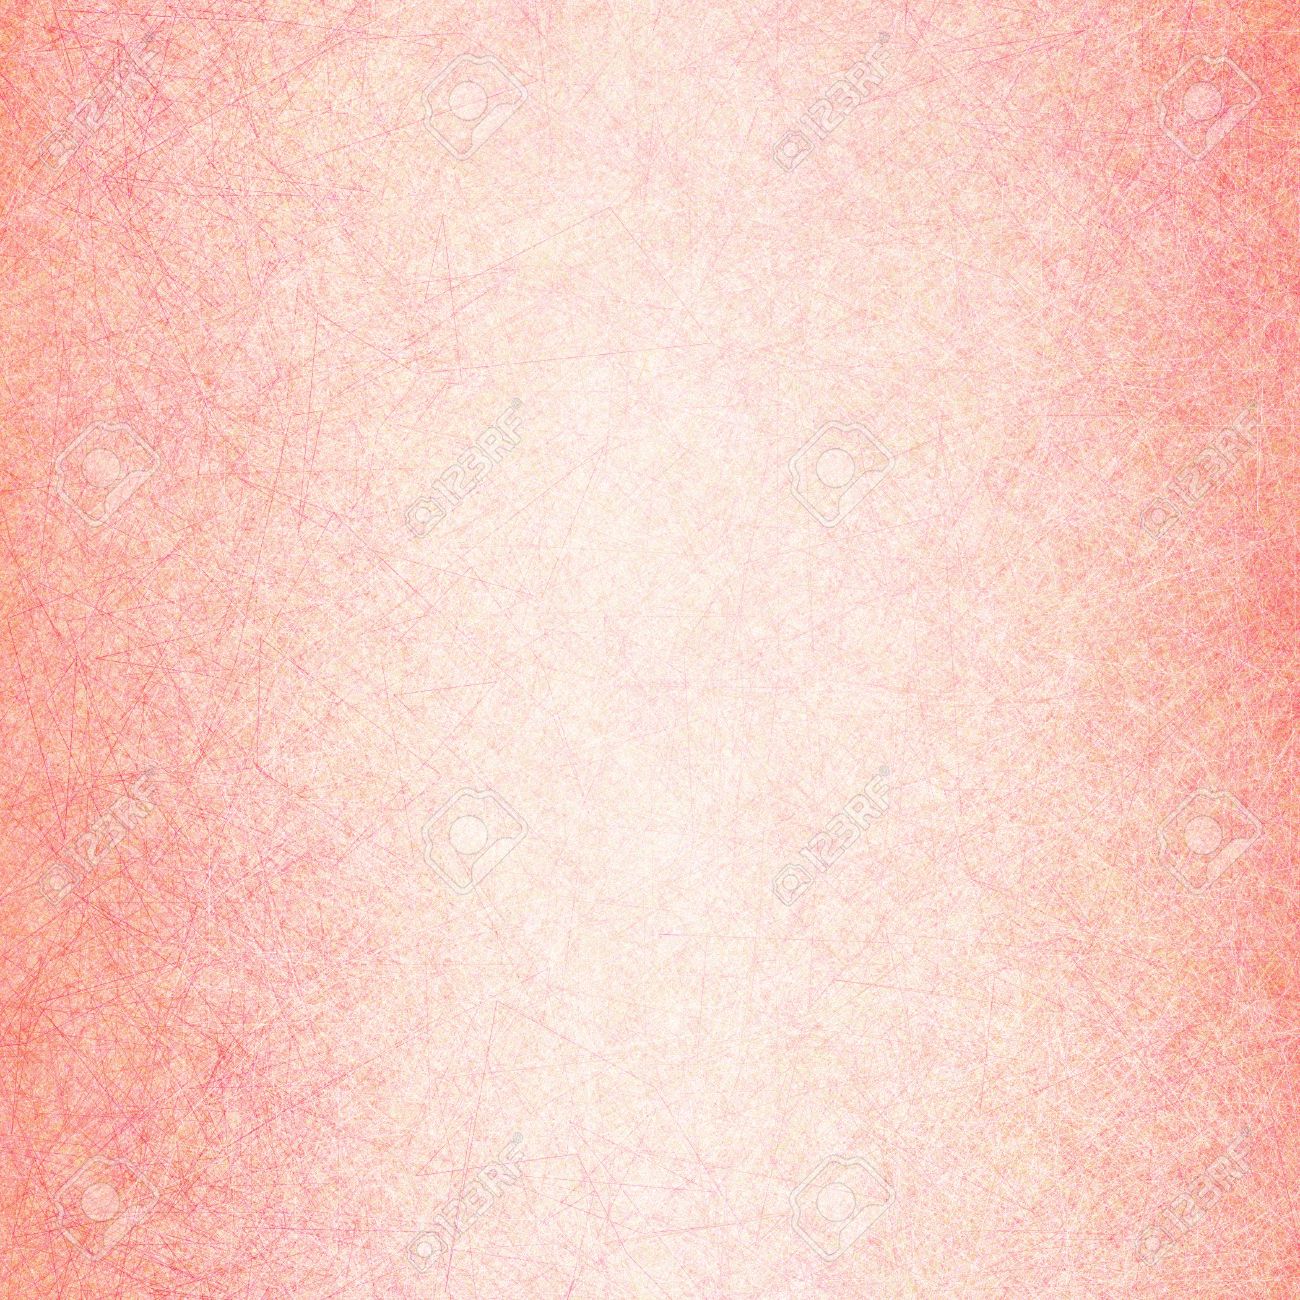 Pink Peach Background With Textured Linen Or Canvas Line Brush